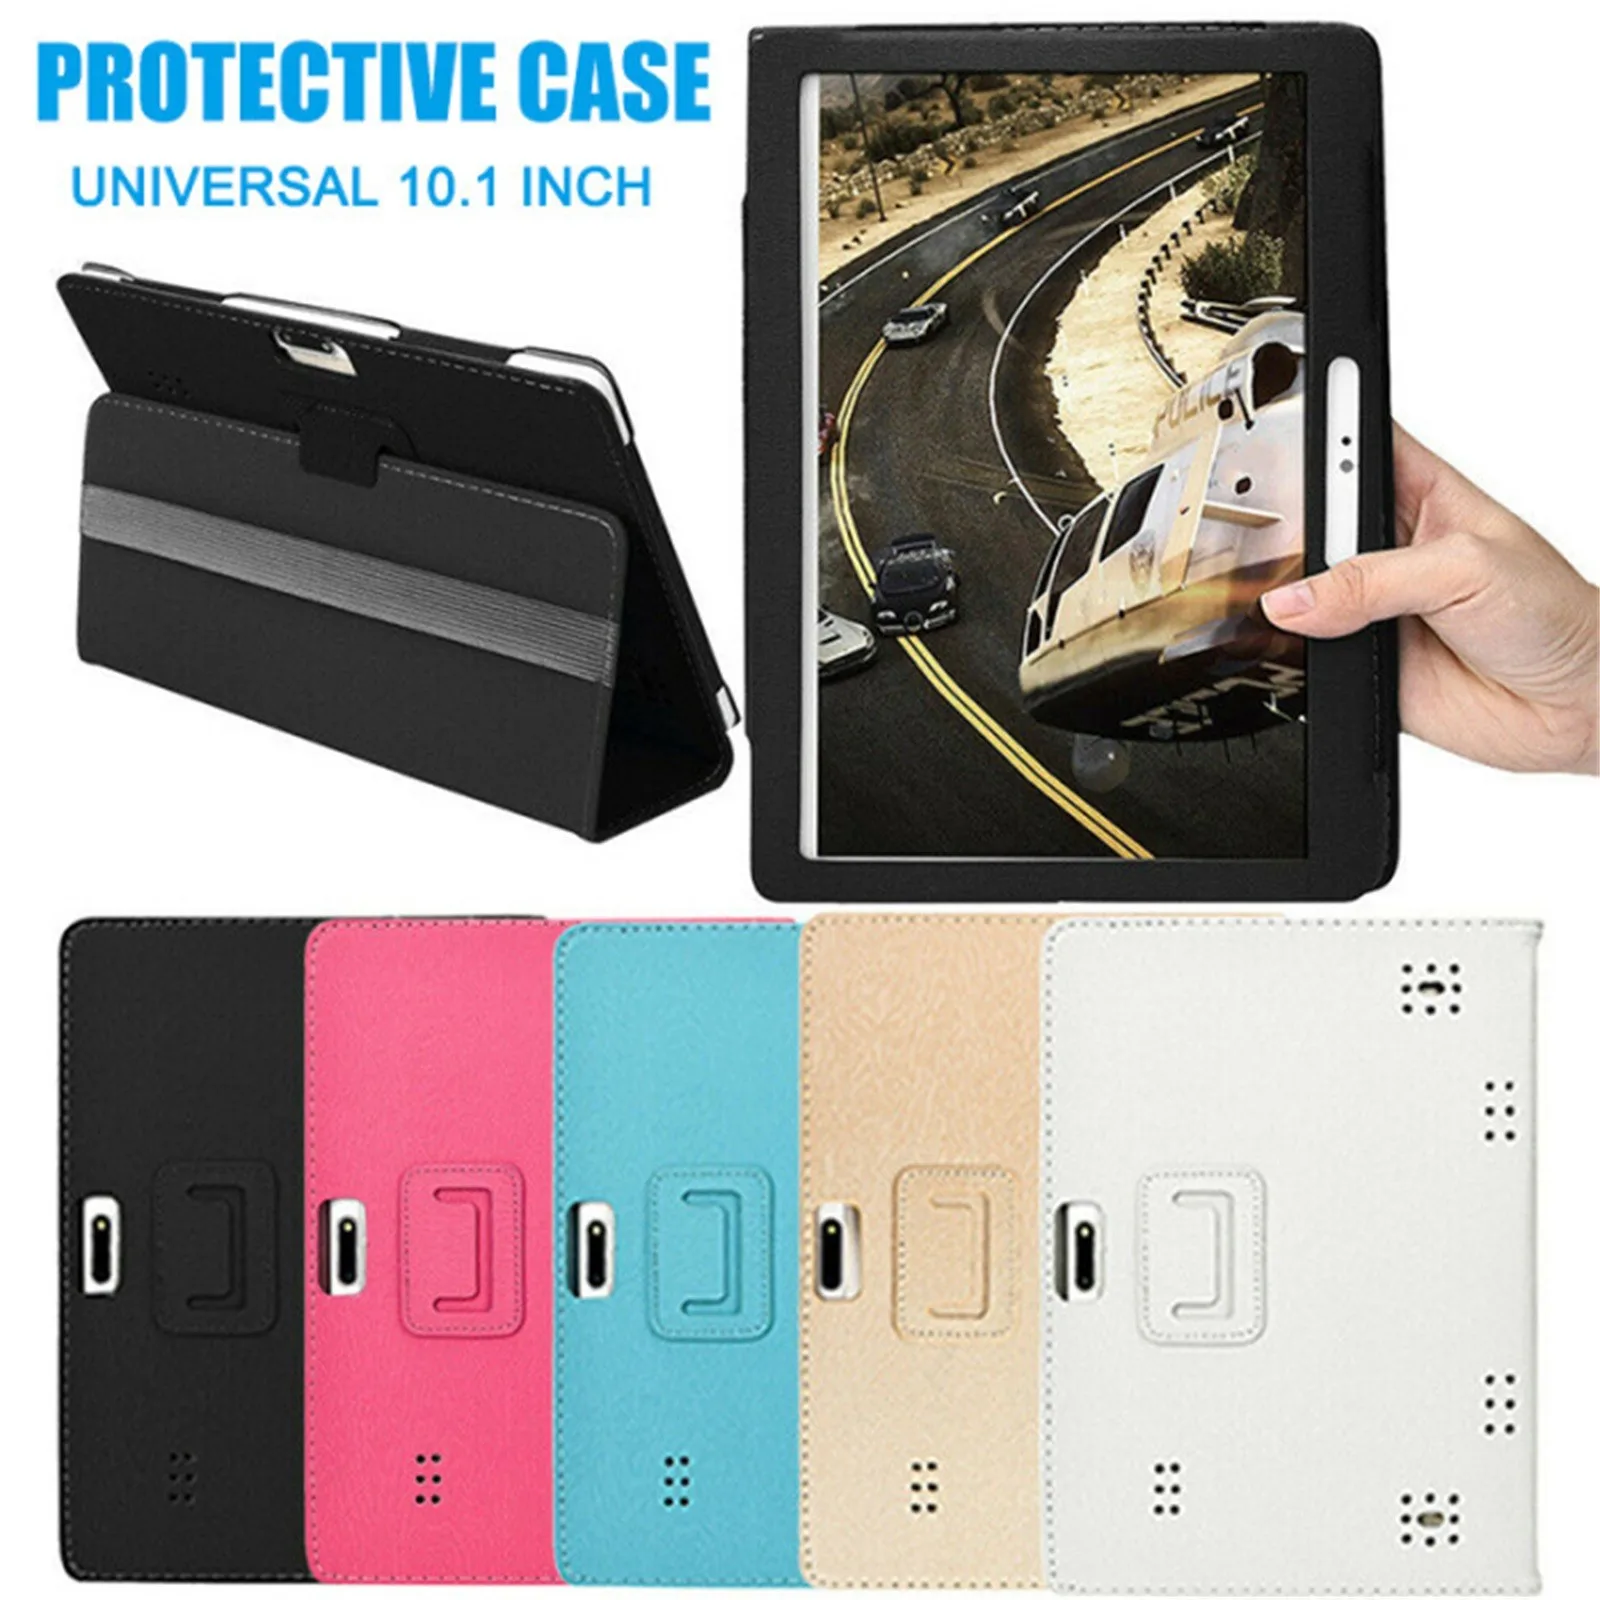 JKRED Premium Leather Stand Shell Hand Strap Design Cover Shockproof Notebook Case for 10/10.1 inch Android Tablet PC 10 10.1 Universal Tablet Protective Case 